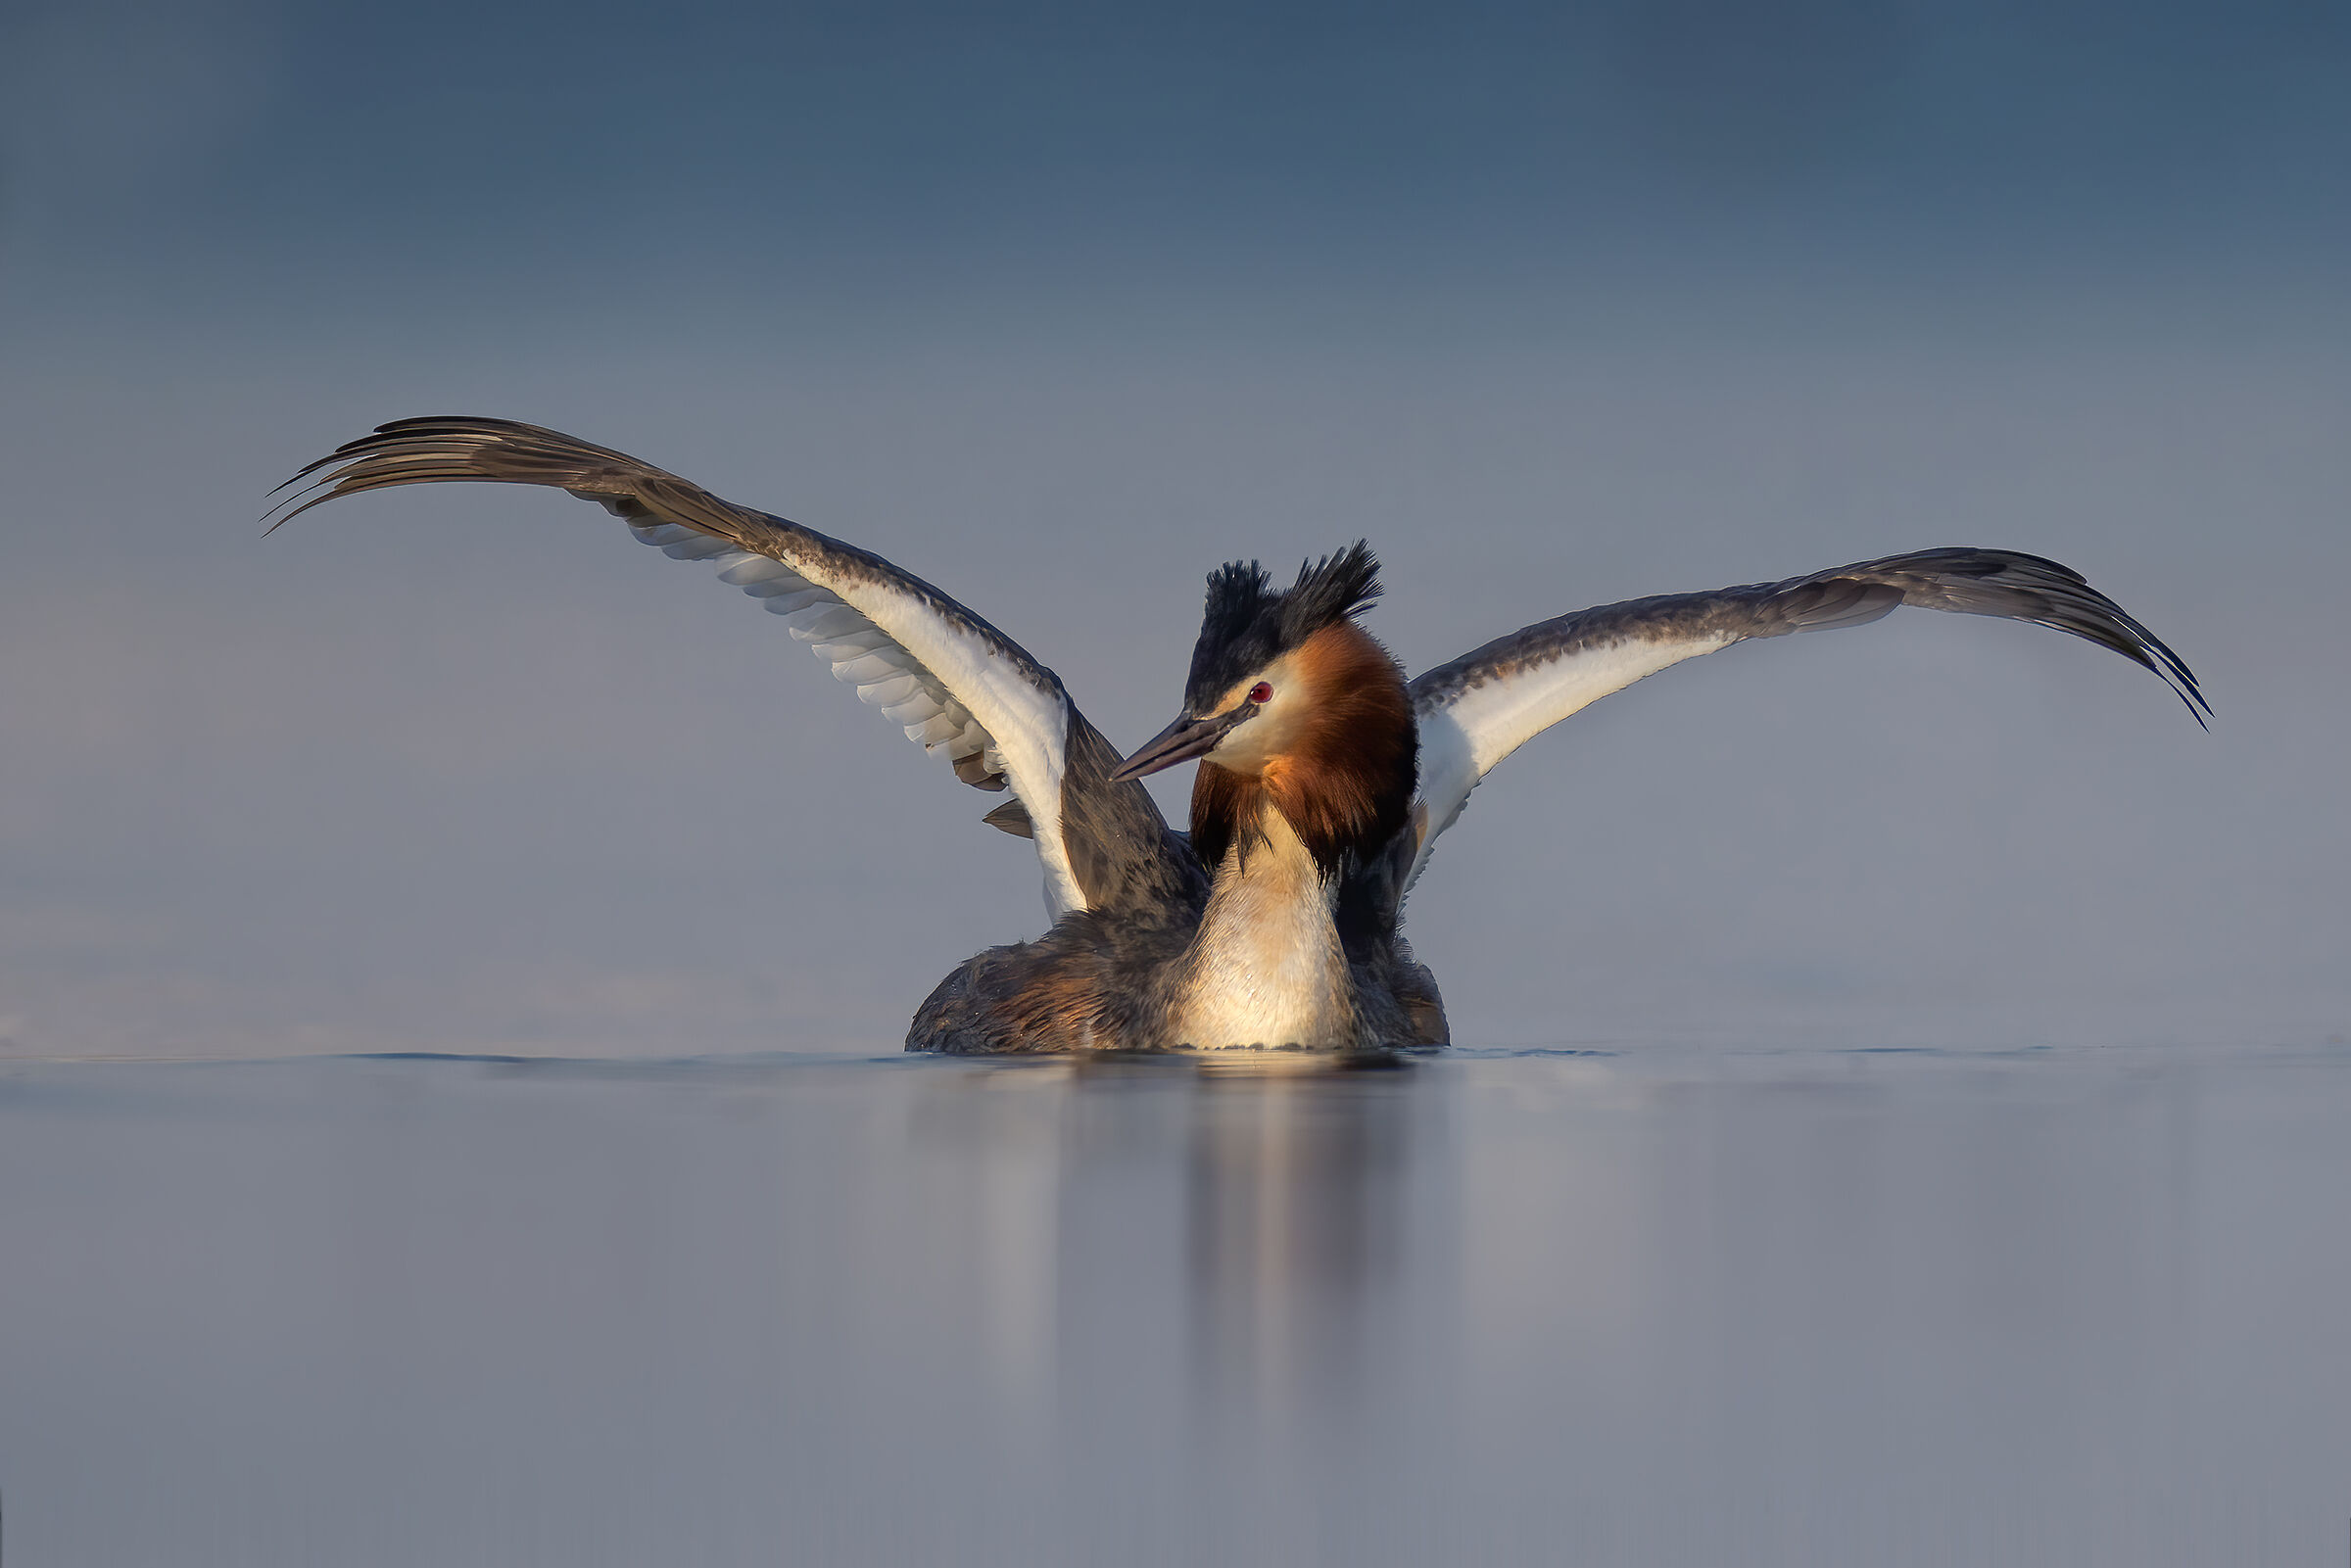 The wings of the Grebe...